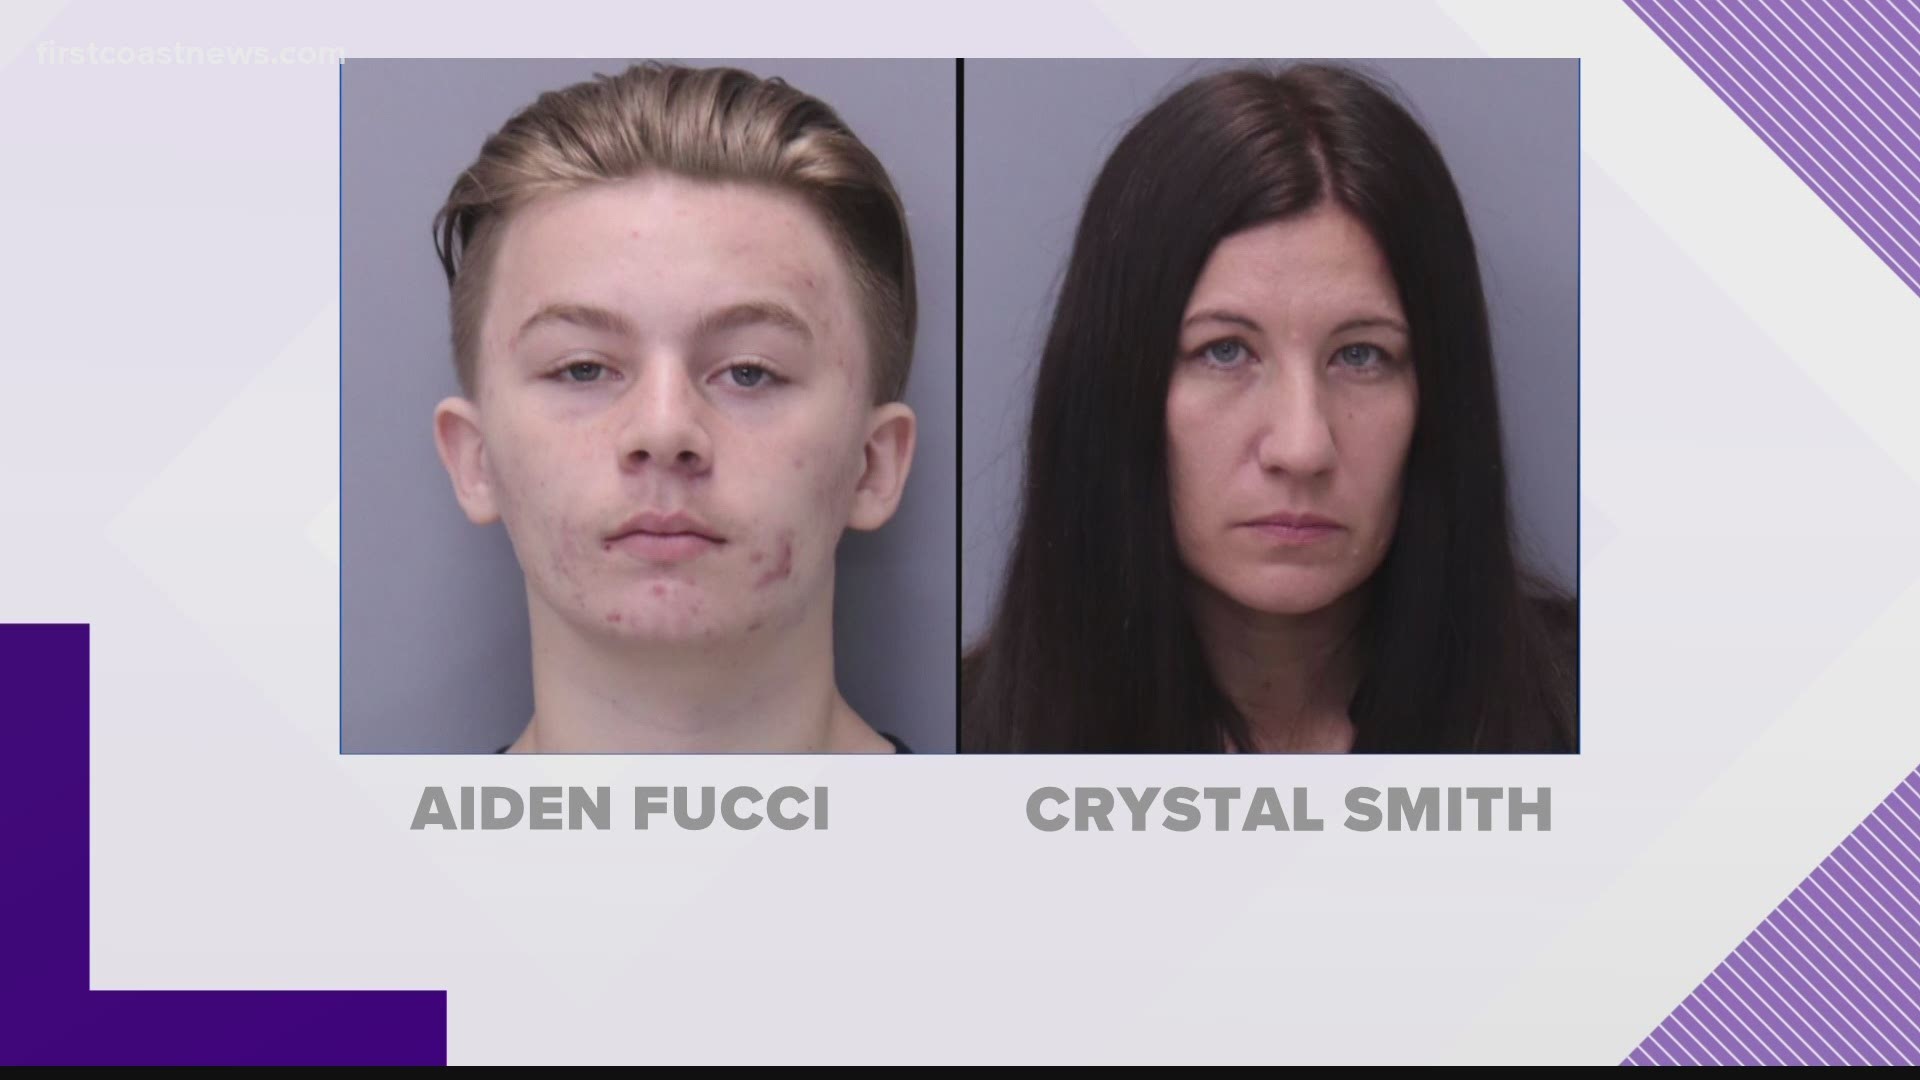 Crystal Smith, Aiden Fucci's mother was arrested in June and charged with tampering with evidence, according to the St. Johns County Sheriff's Office.